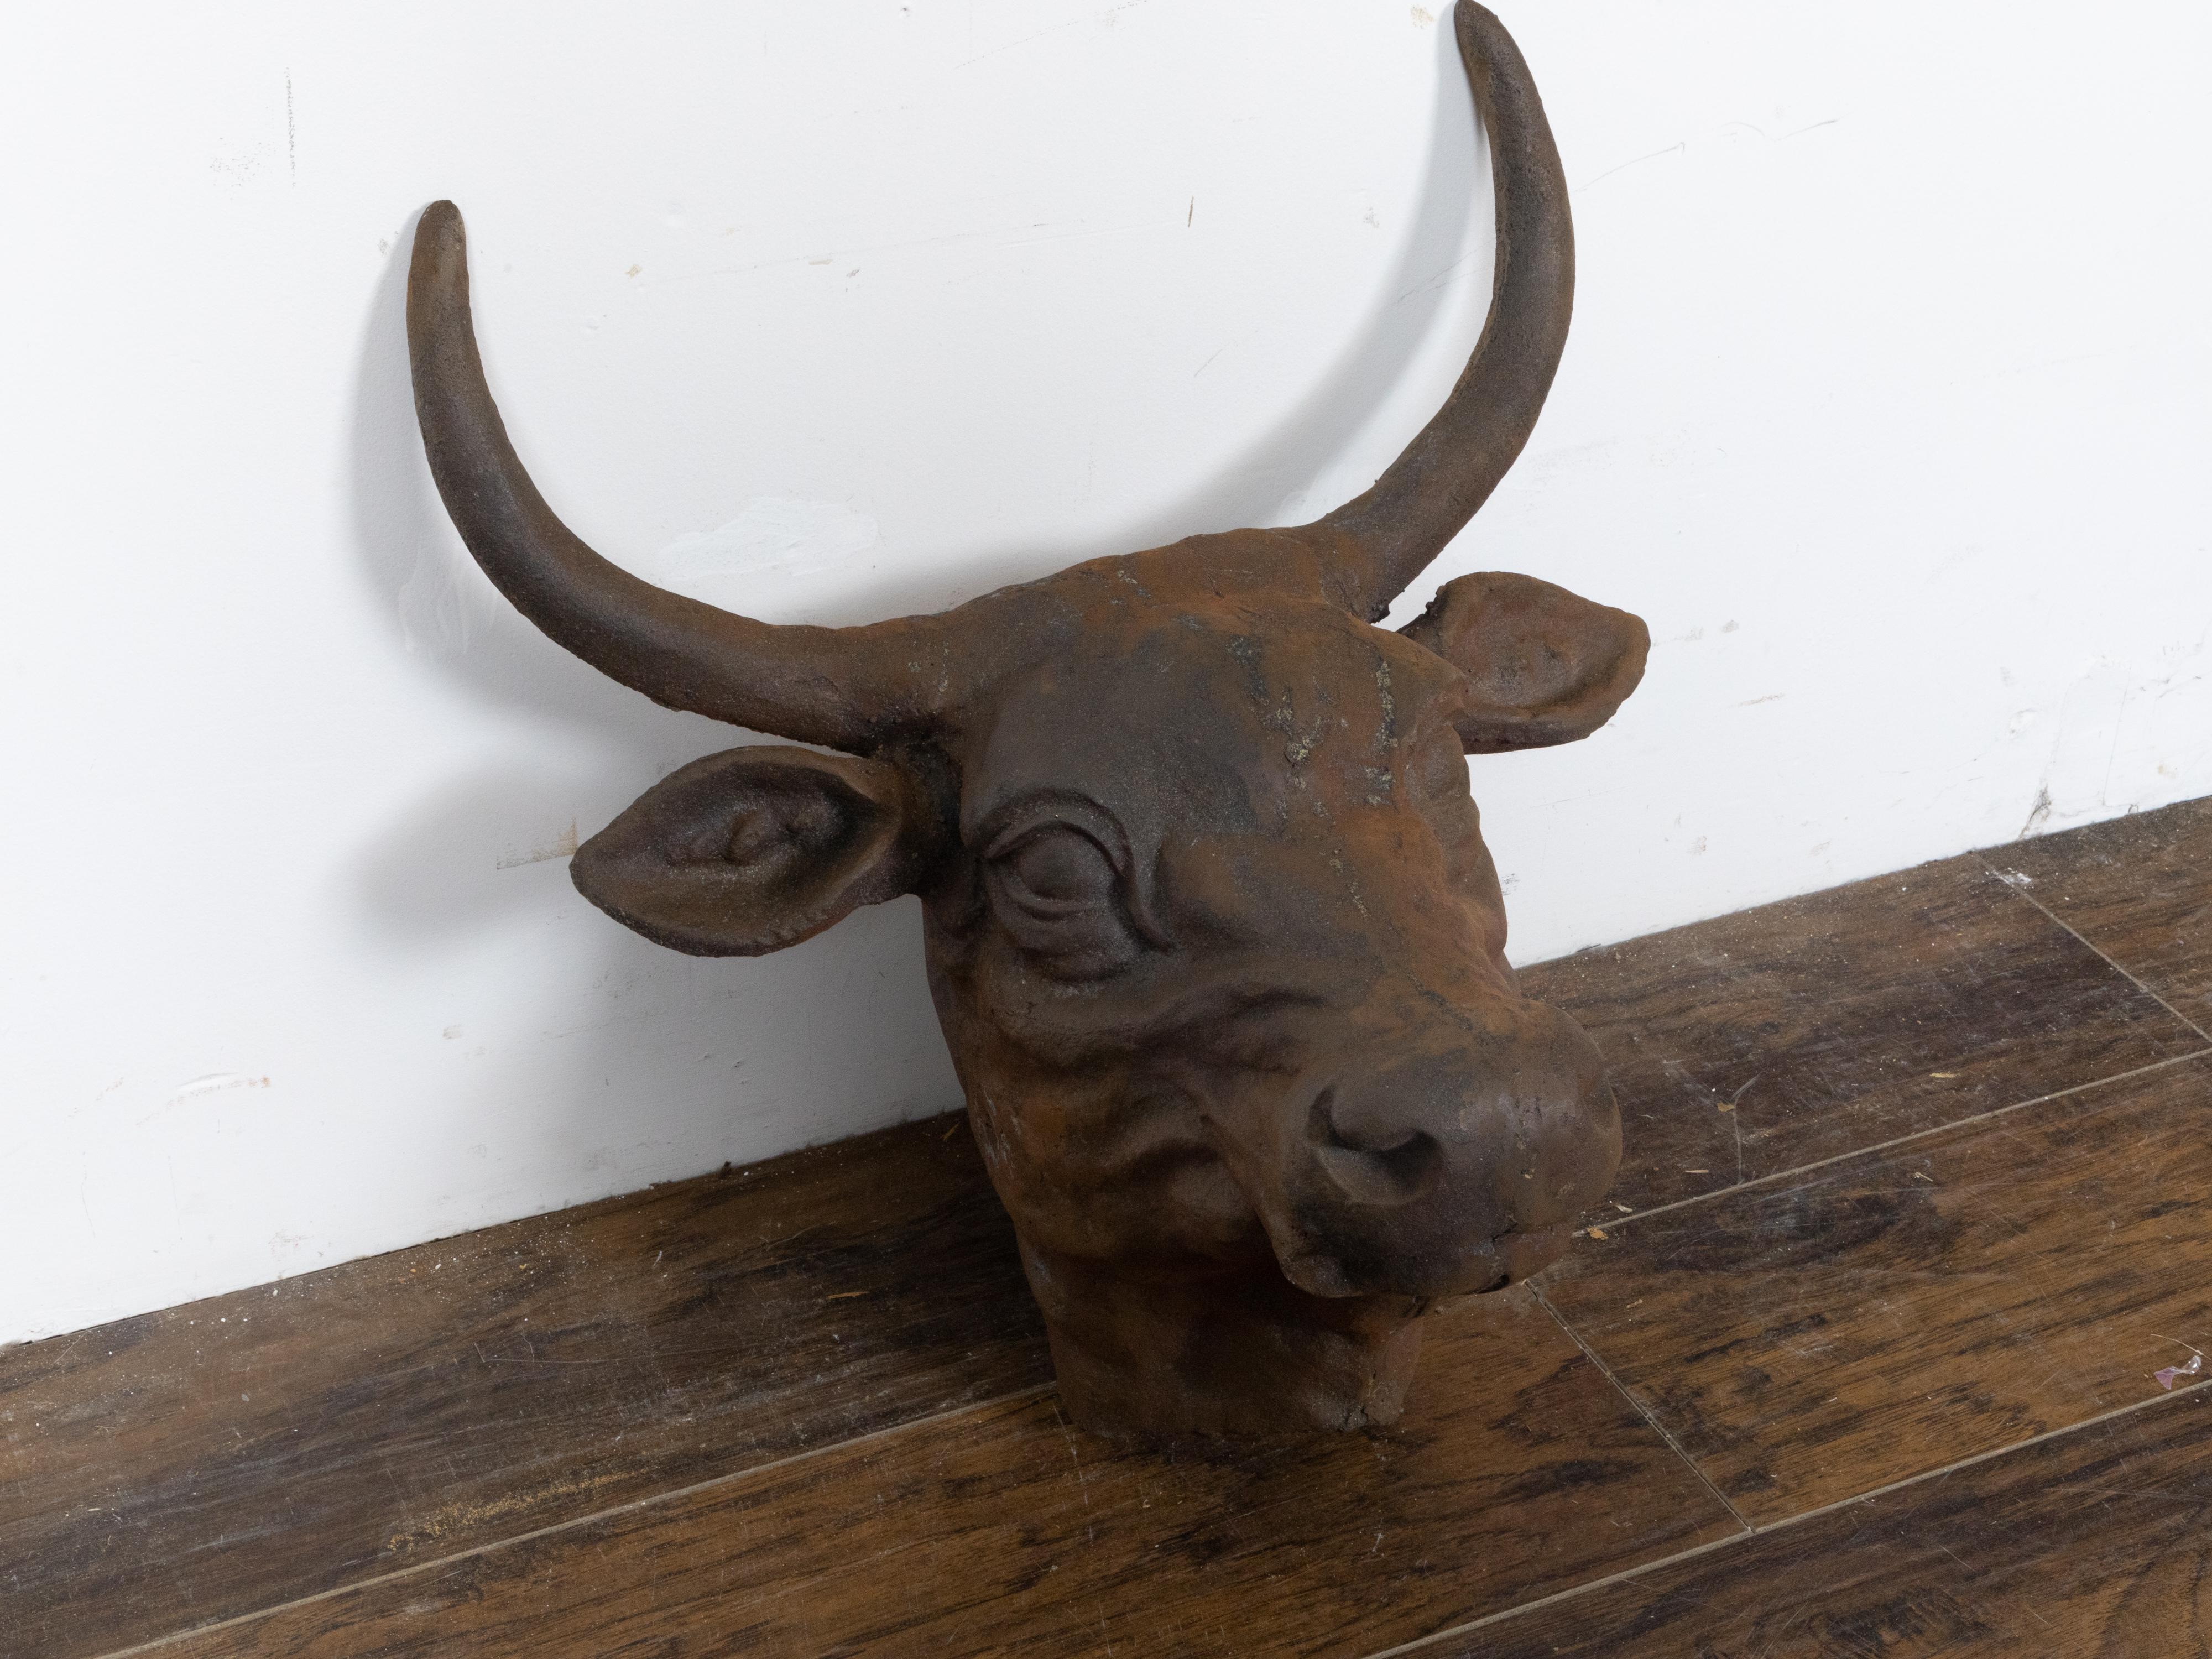 20th Century English 1930s-1940s Cast Iron Bull Wall Hanging Sculpture with Rusty Patina For Sale